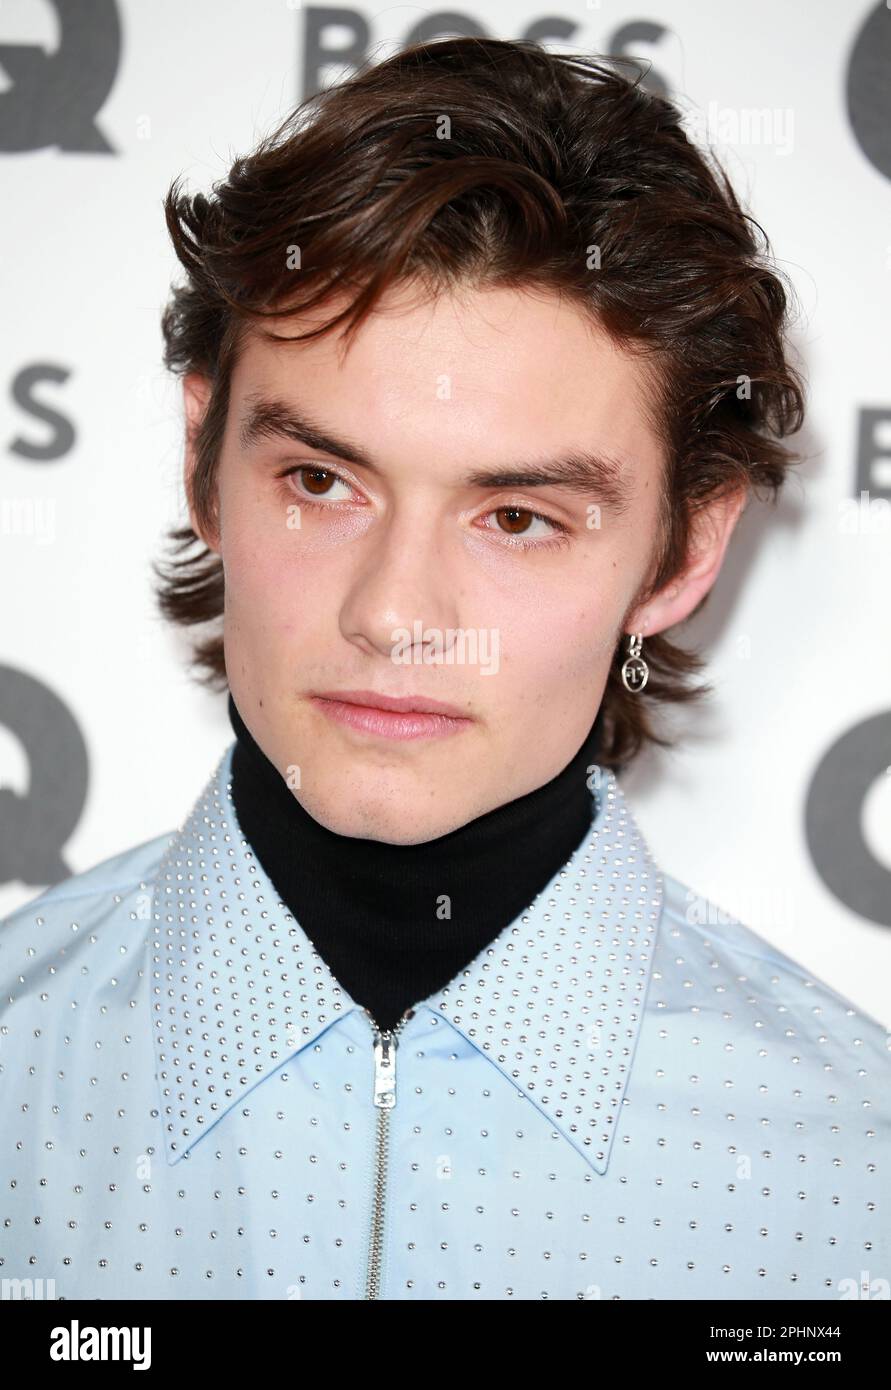 Louis Partridge attends the GQ Men Of The Year Awards 2022 at The